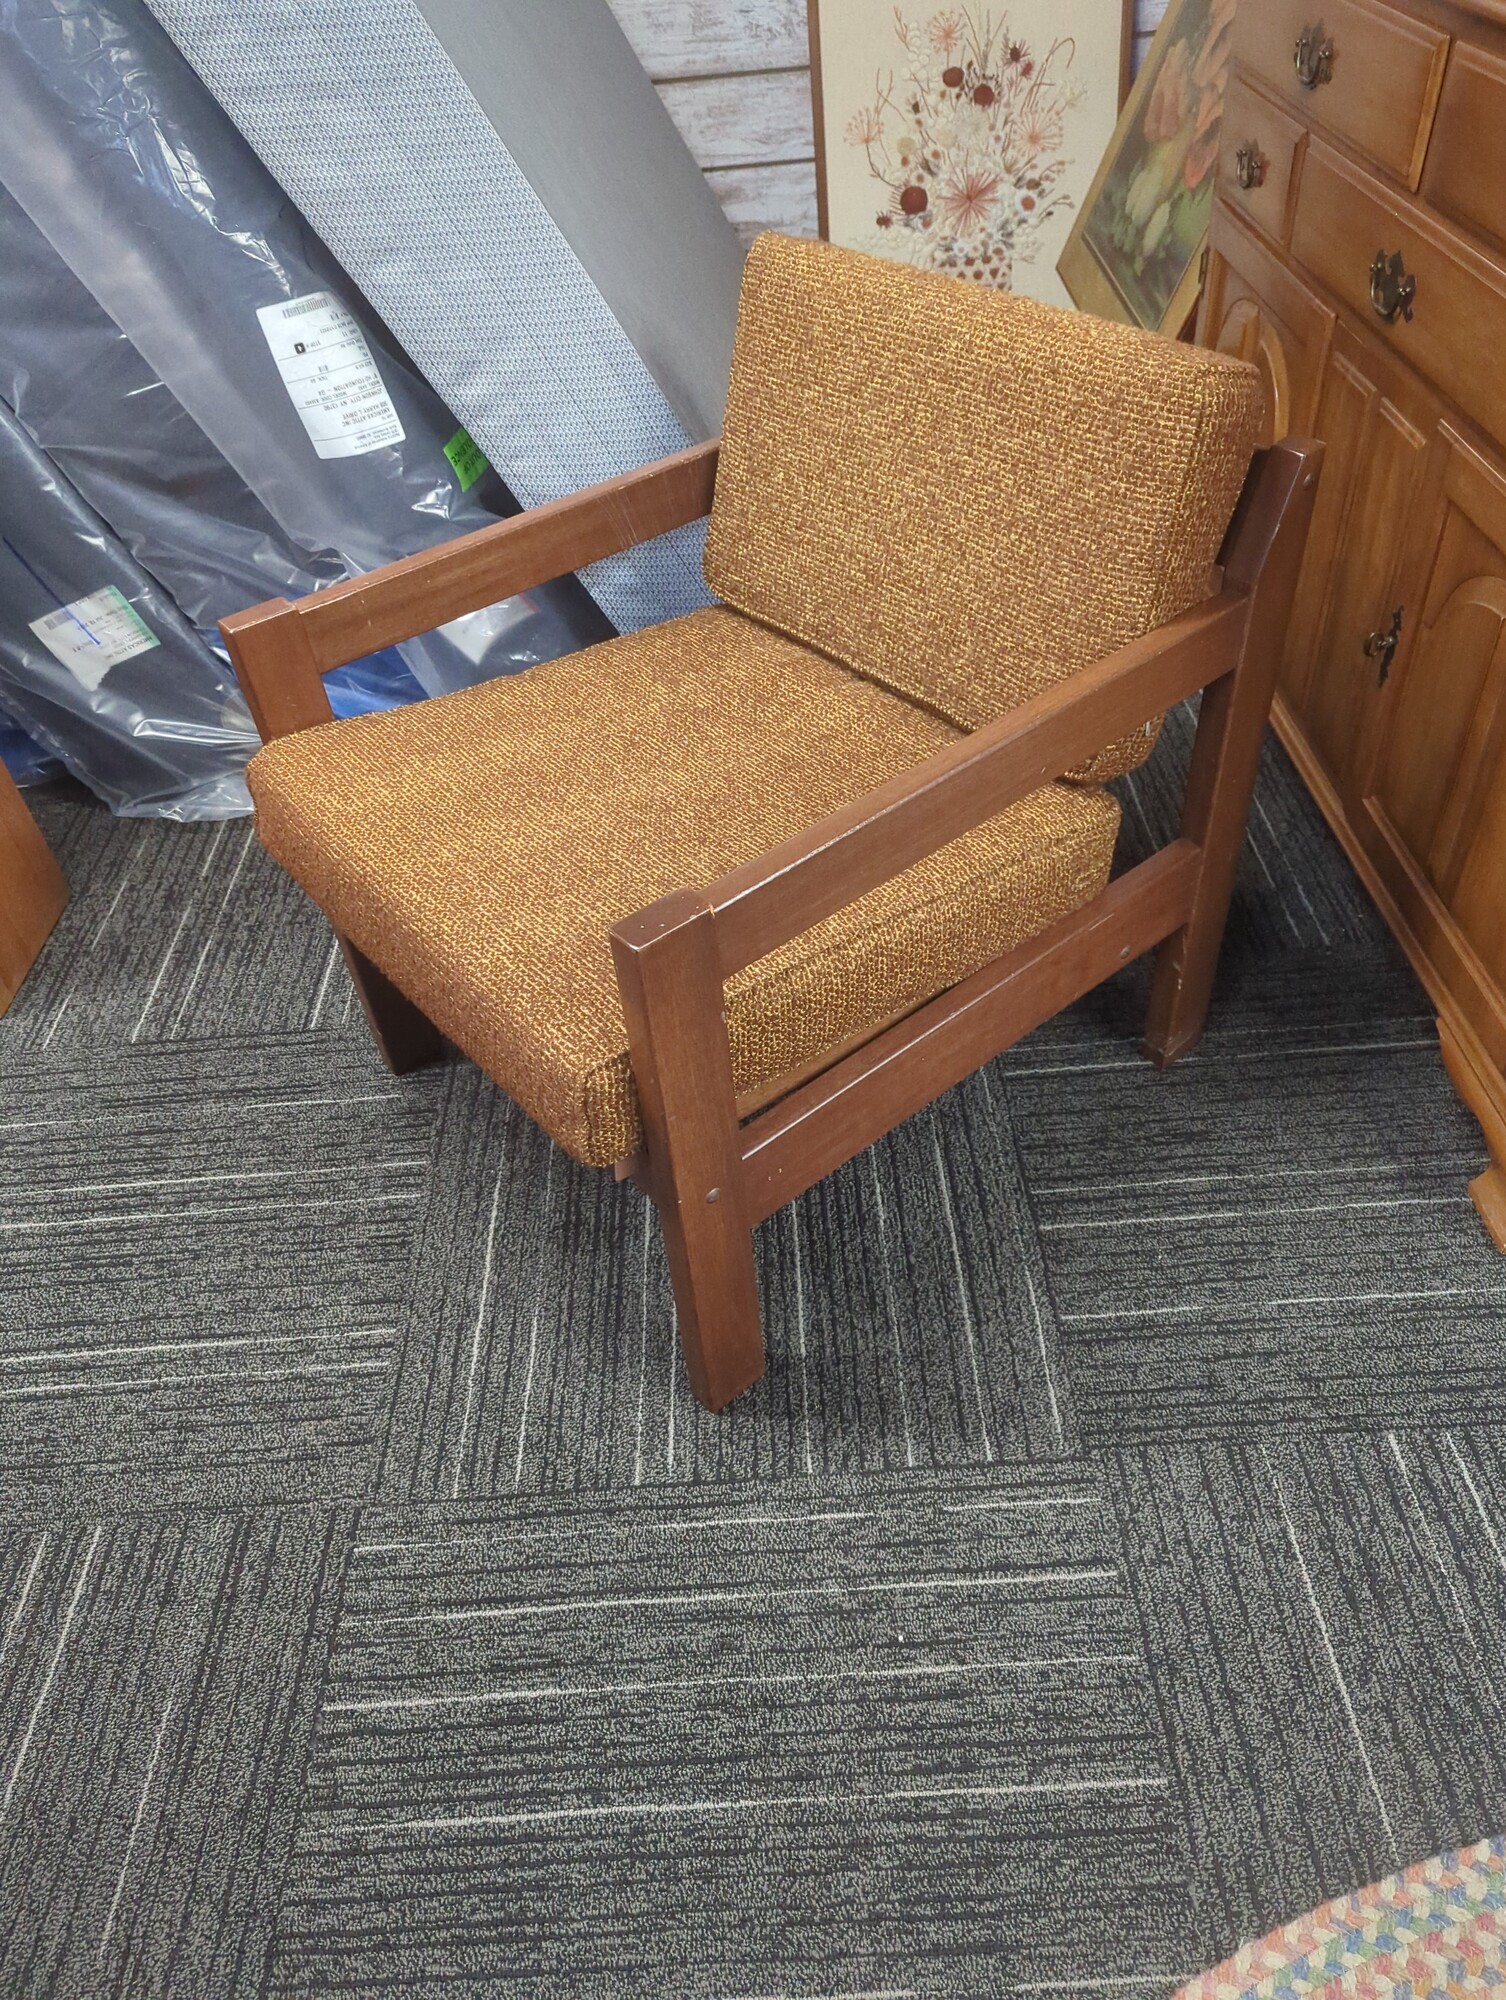 Vintage chair. 24in wide.